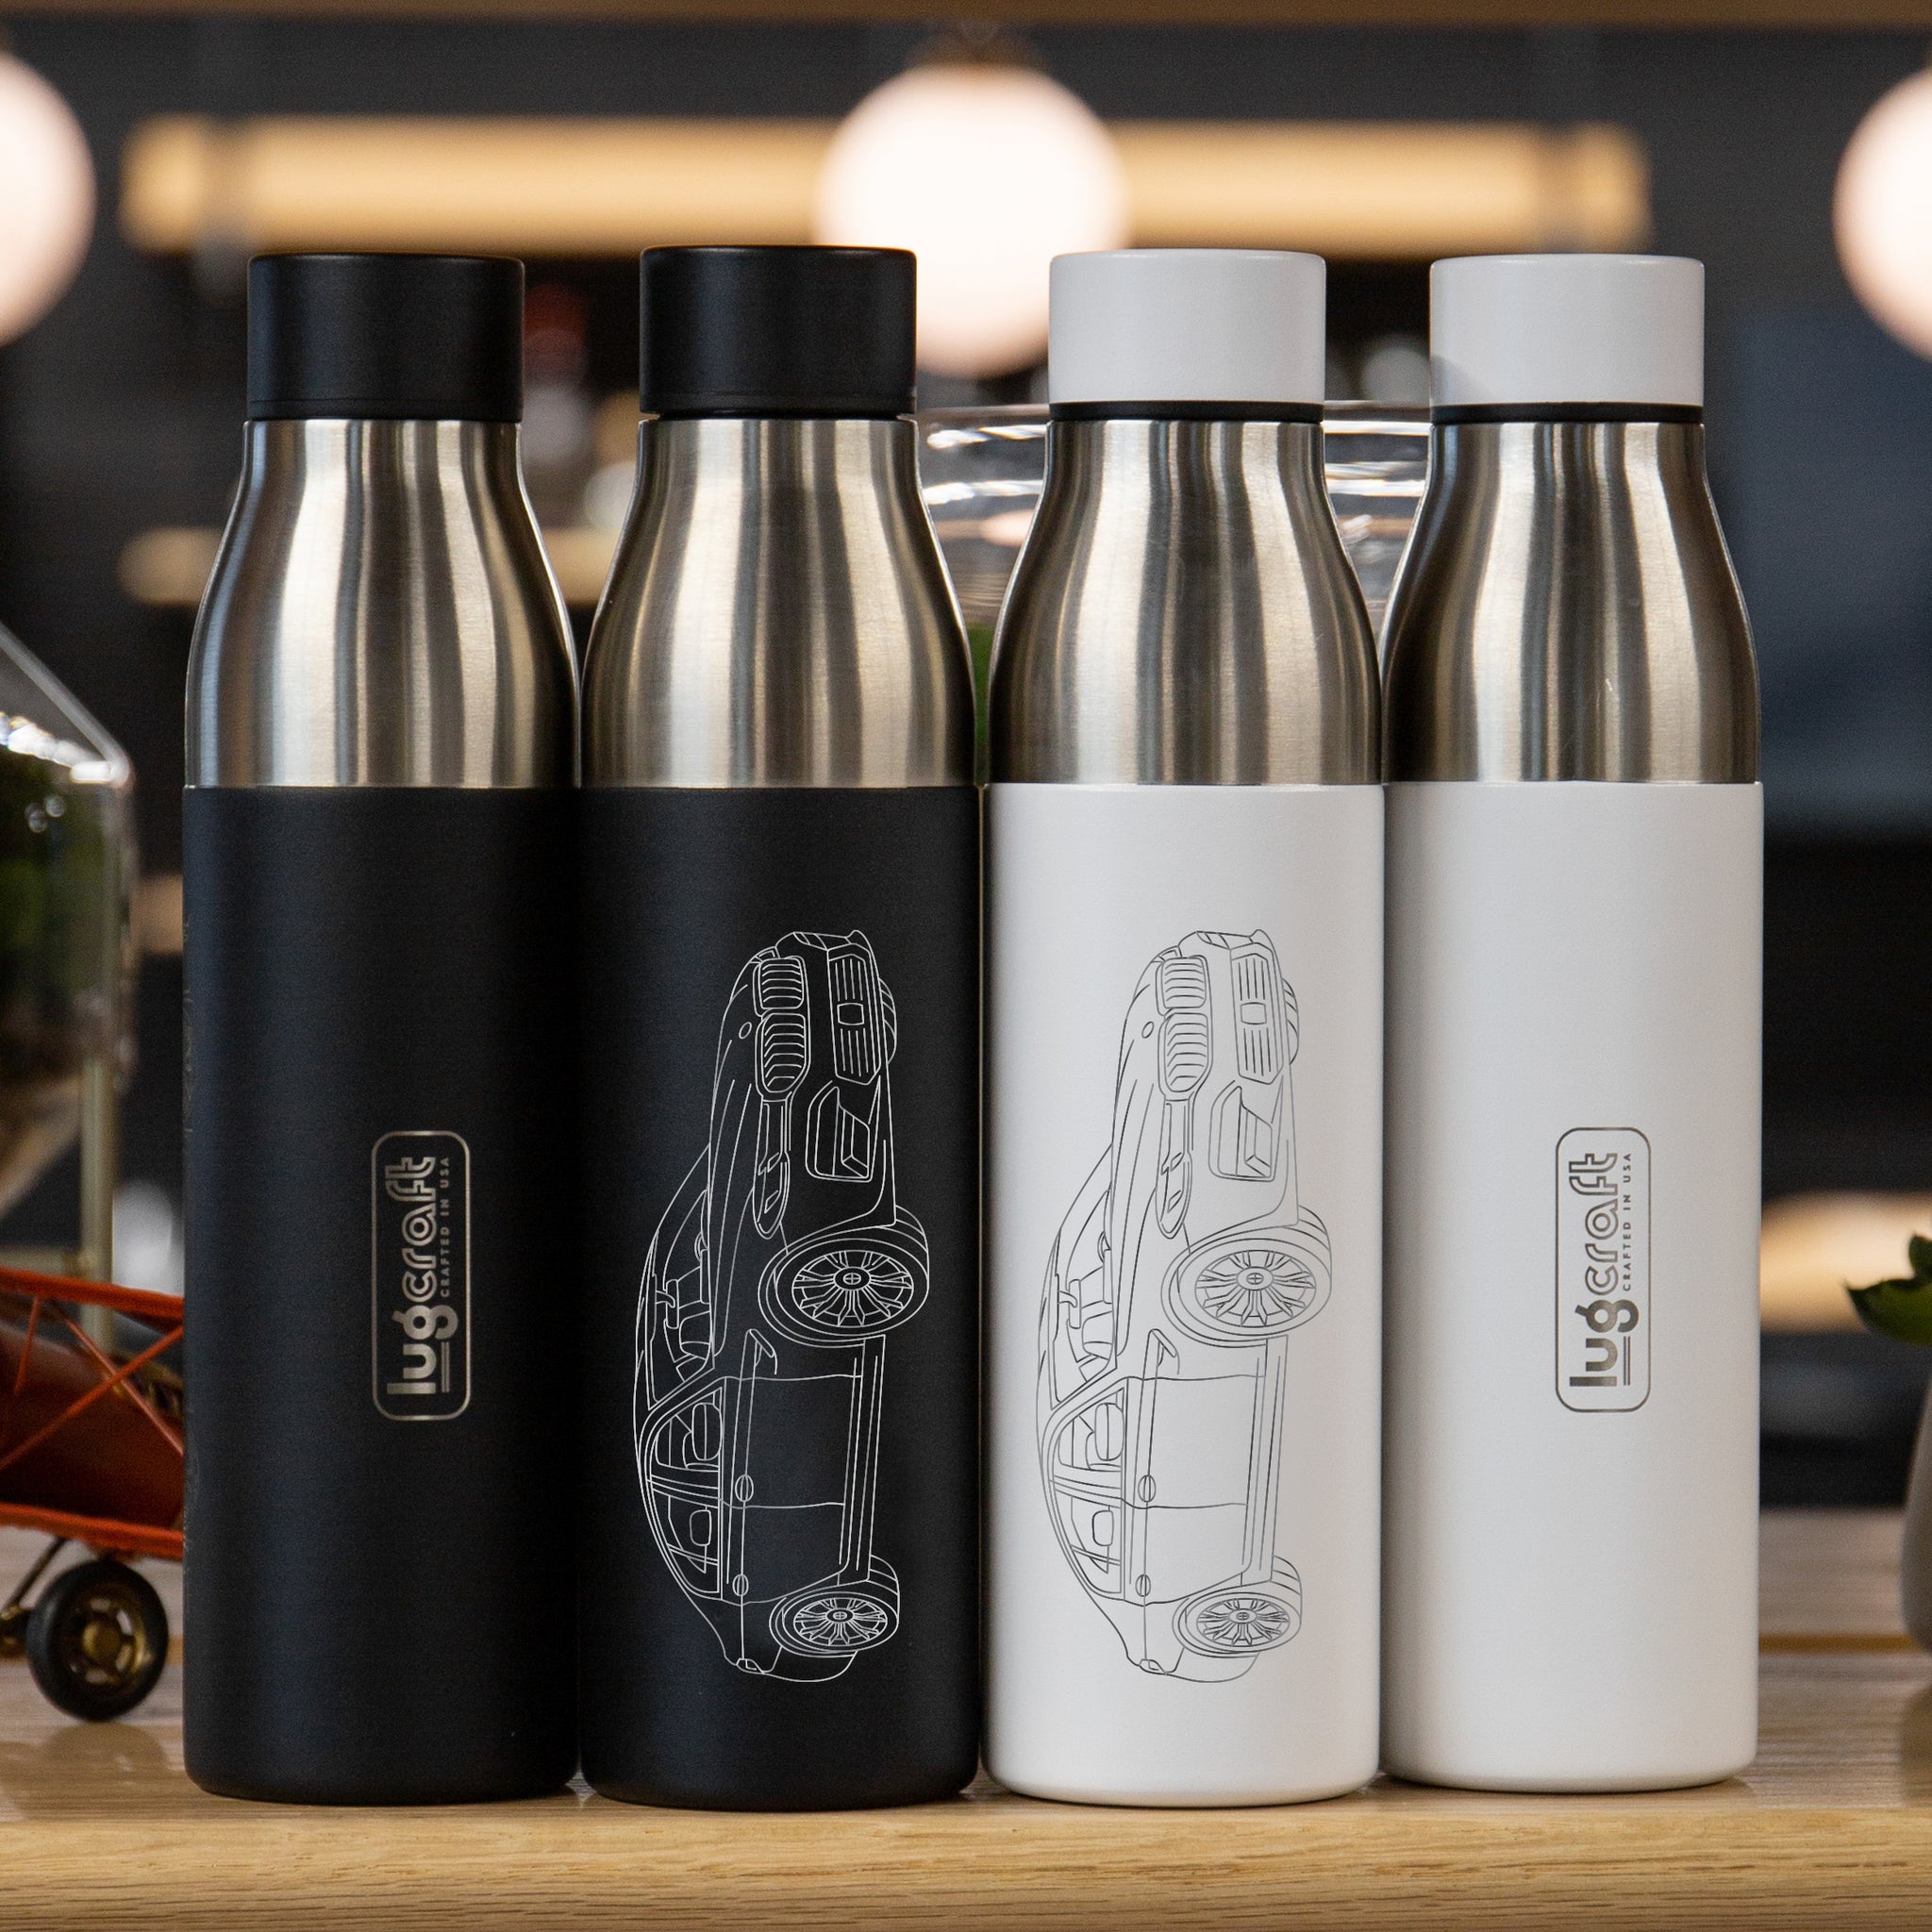 BMW M5 F90 Insulated Stainless Steel Water Bottle - 21 oz